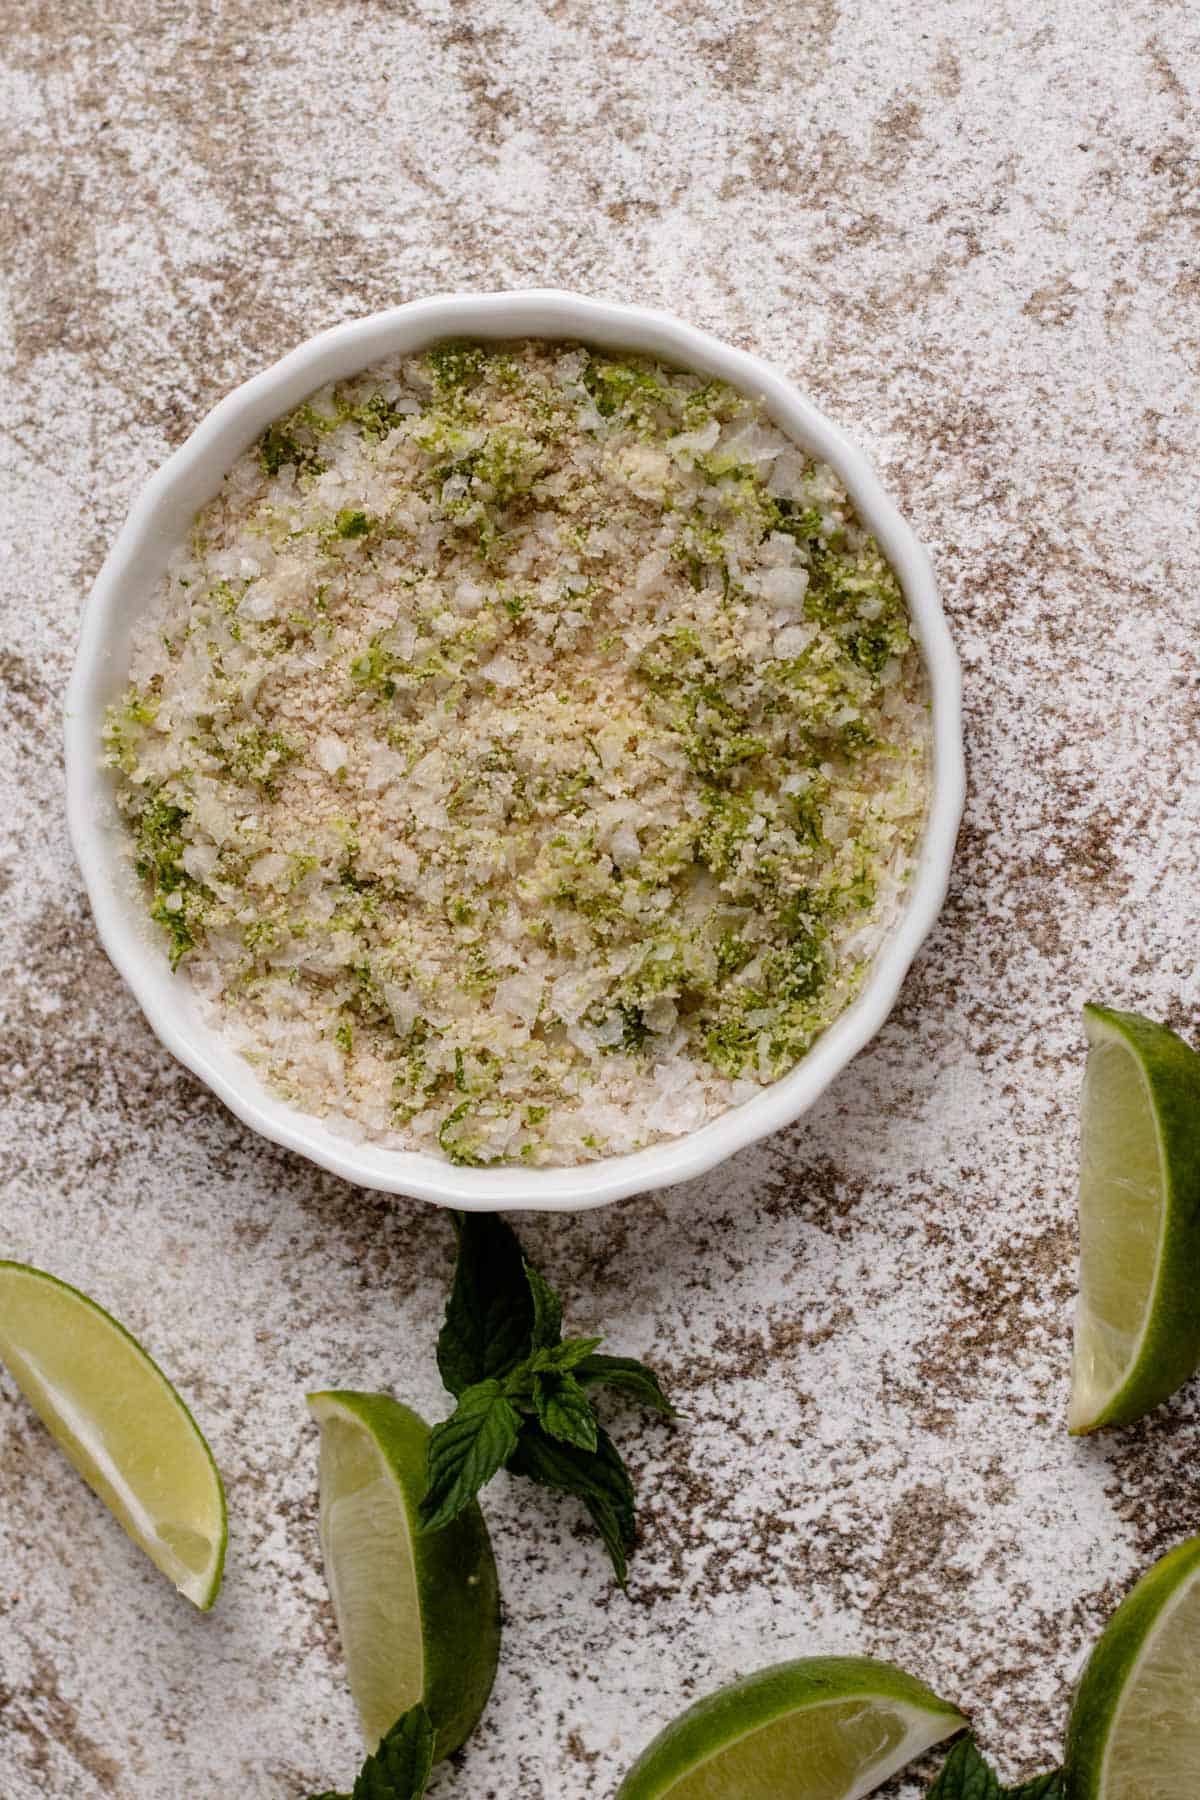 Mixture of sea salt, lime zest, and honey crystals.